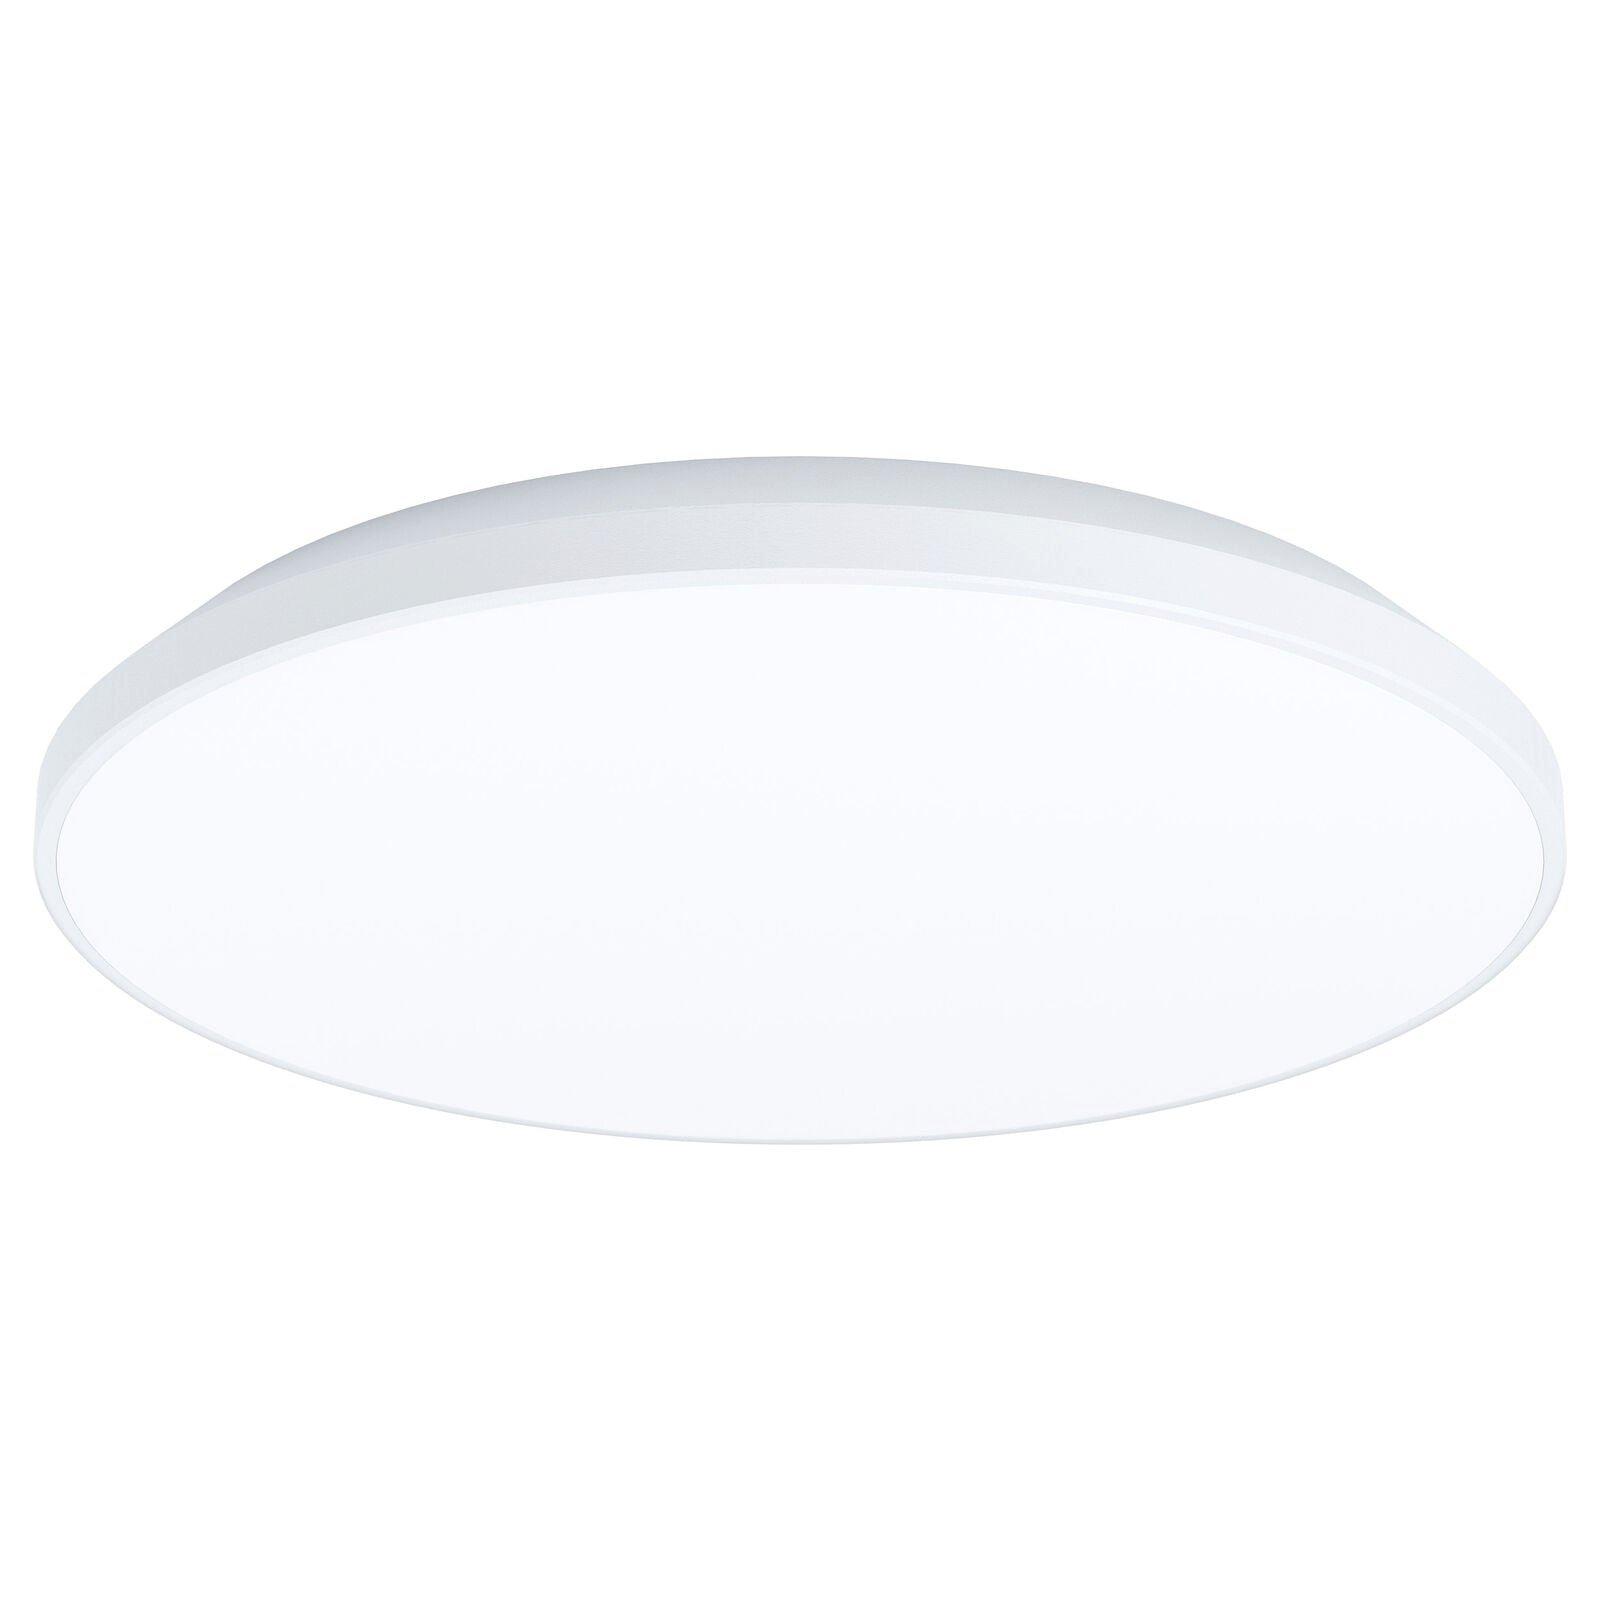 Wall / Ceiling Light White Round Surface Moutned 315mm 18W Built in LED